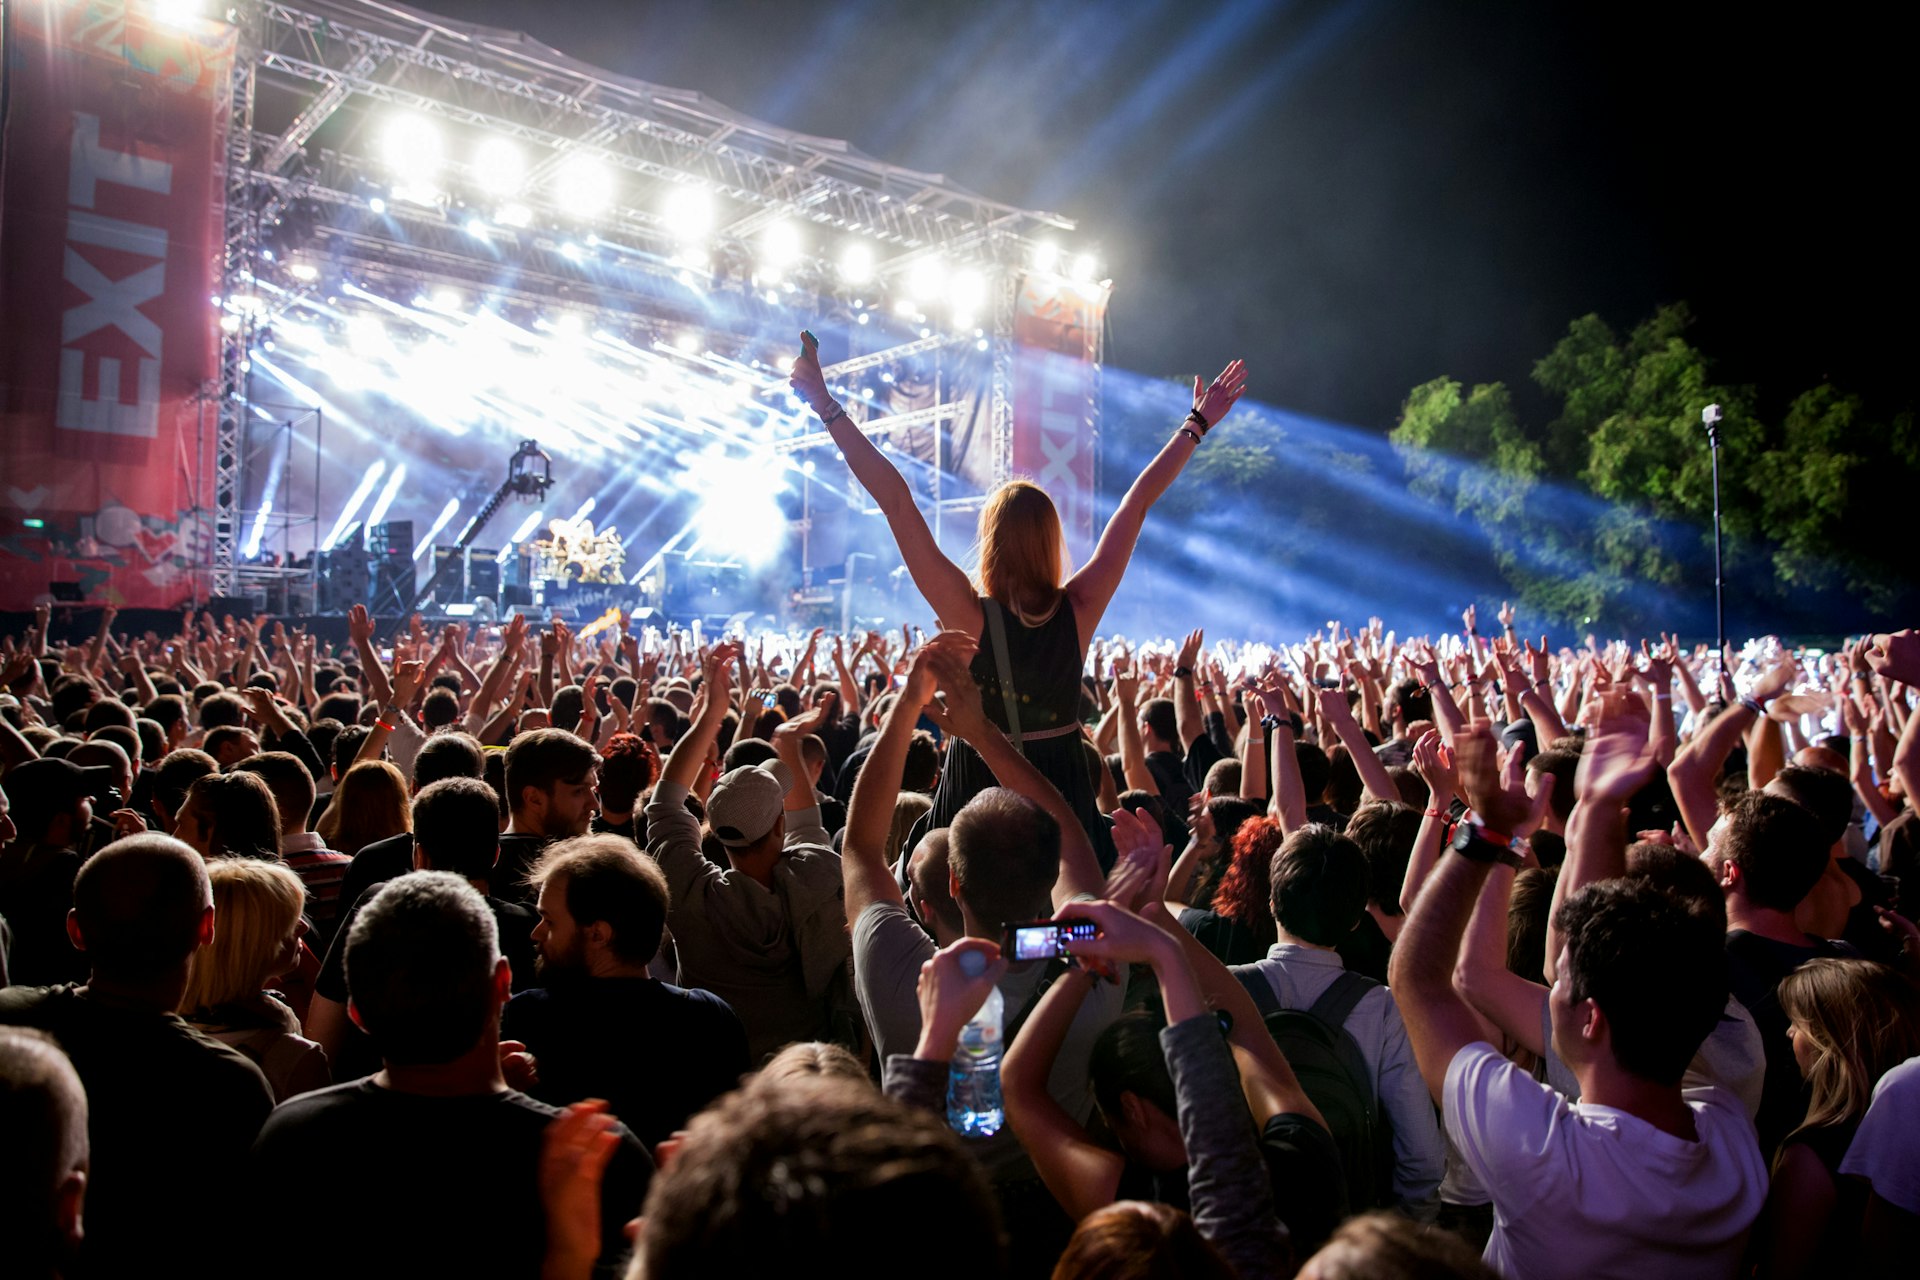 Crowd of revelers in front of the main stage at EXIT 2015 Music Festival during a set by heavy metal band Motorhead